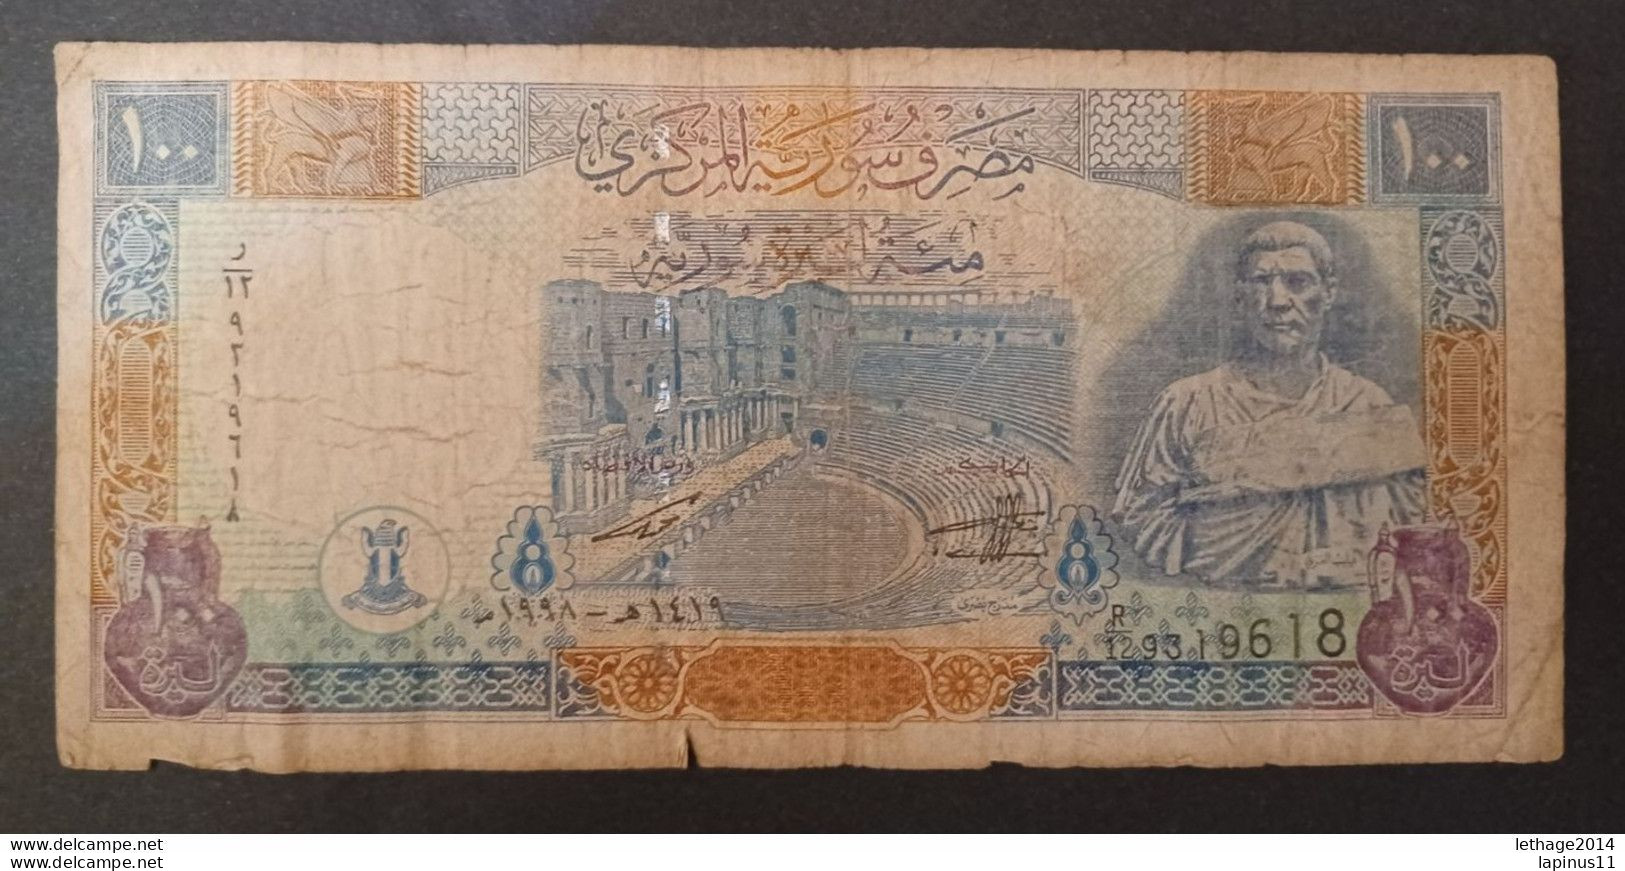 BANKNOTE سوريا SYRIA 100 POUNDS ALEPPO 1998 CIRCULATED - Syrie